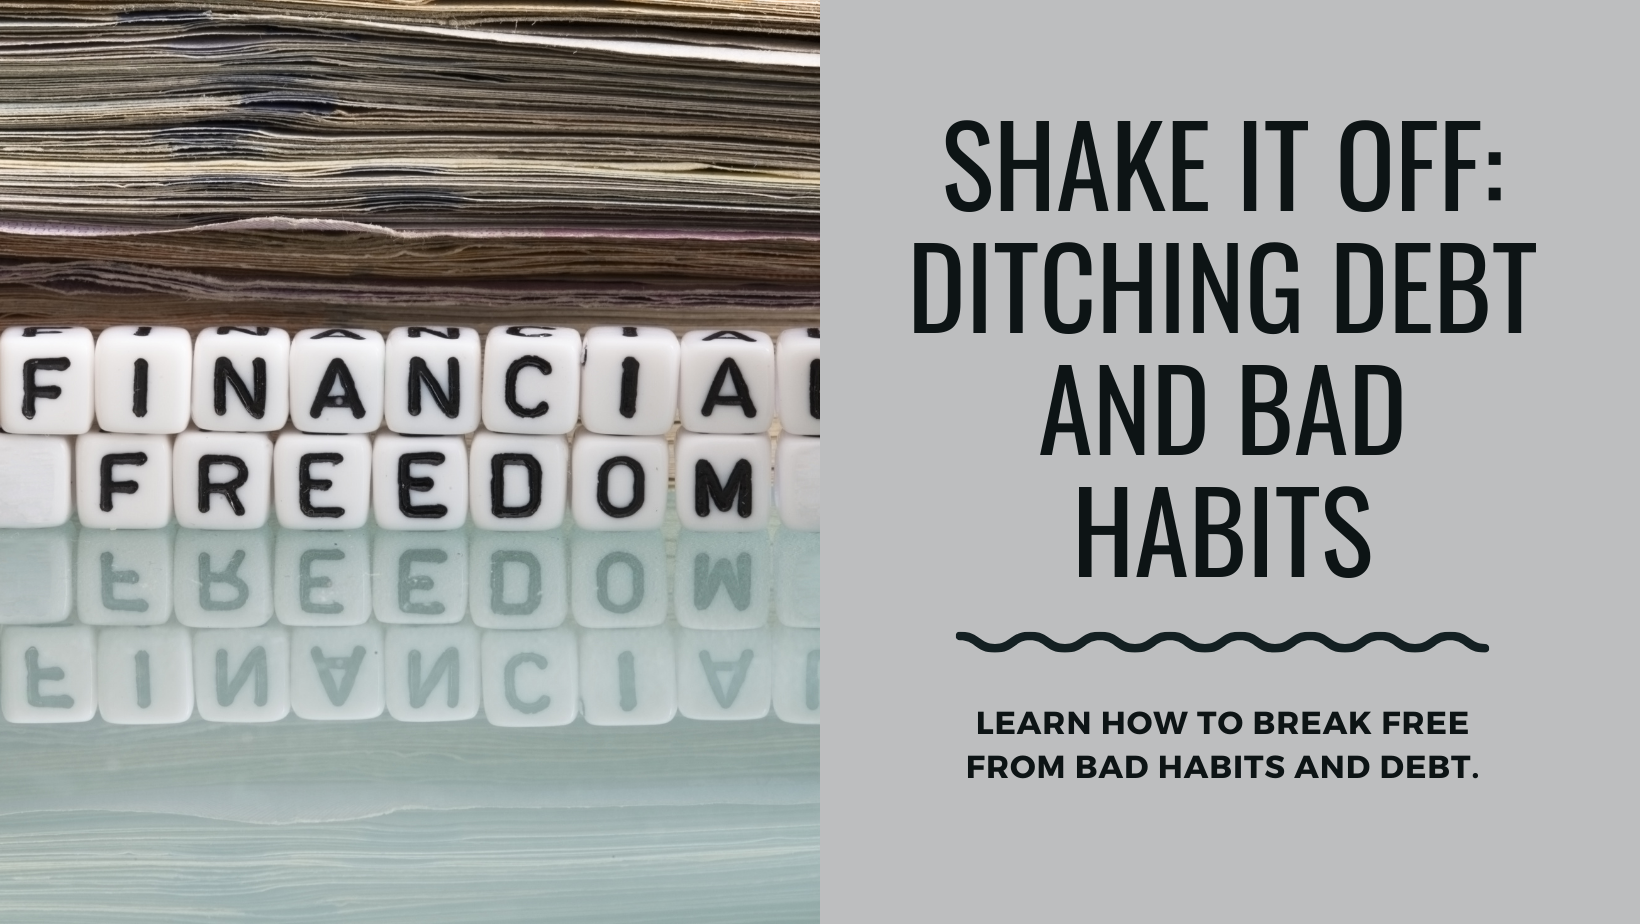 Lesson 2: "Shake It Off" – Ditching Debt and Bad Habits